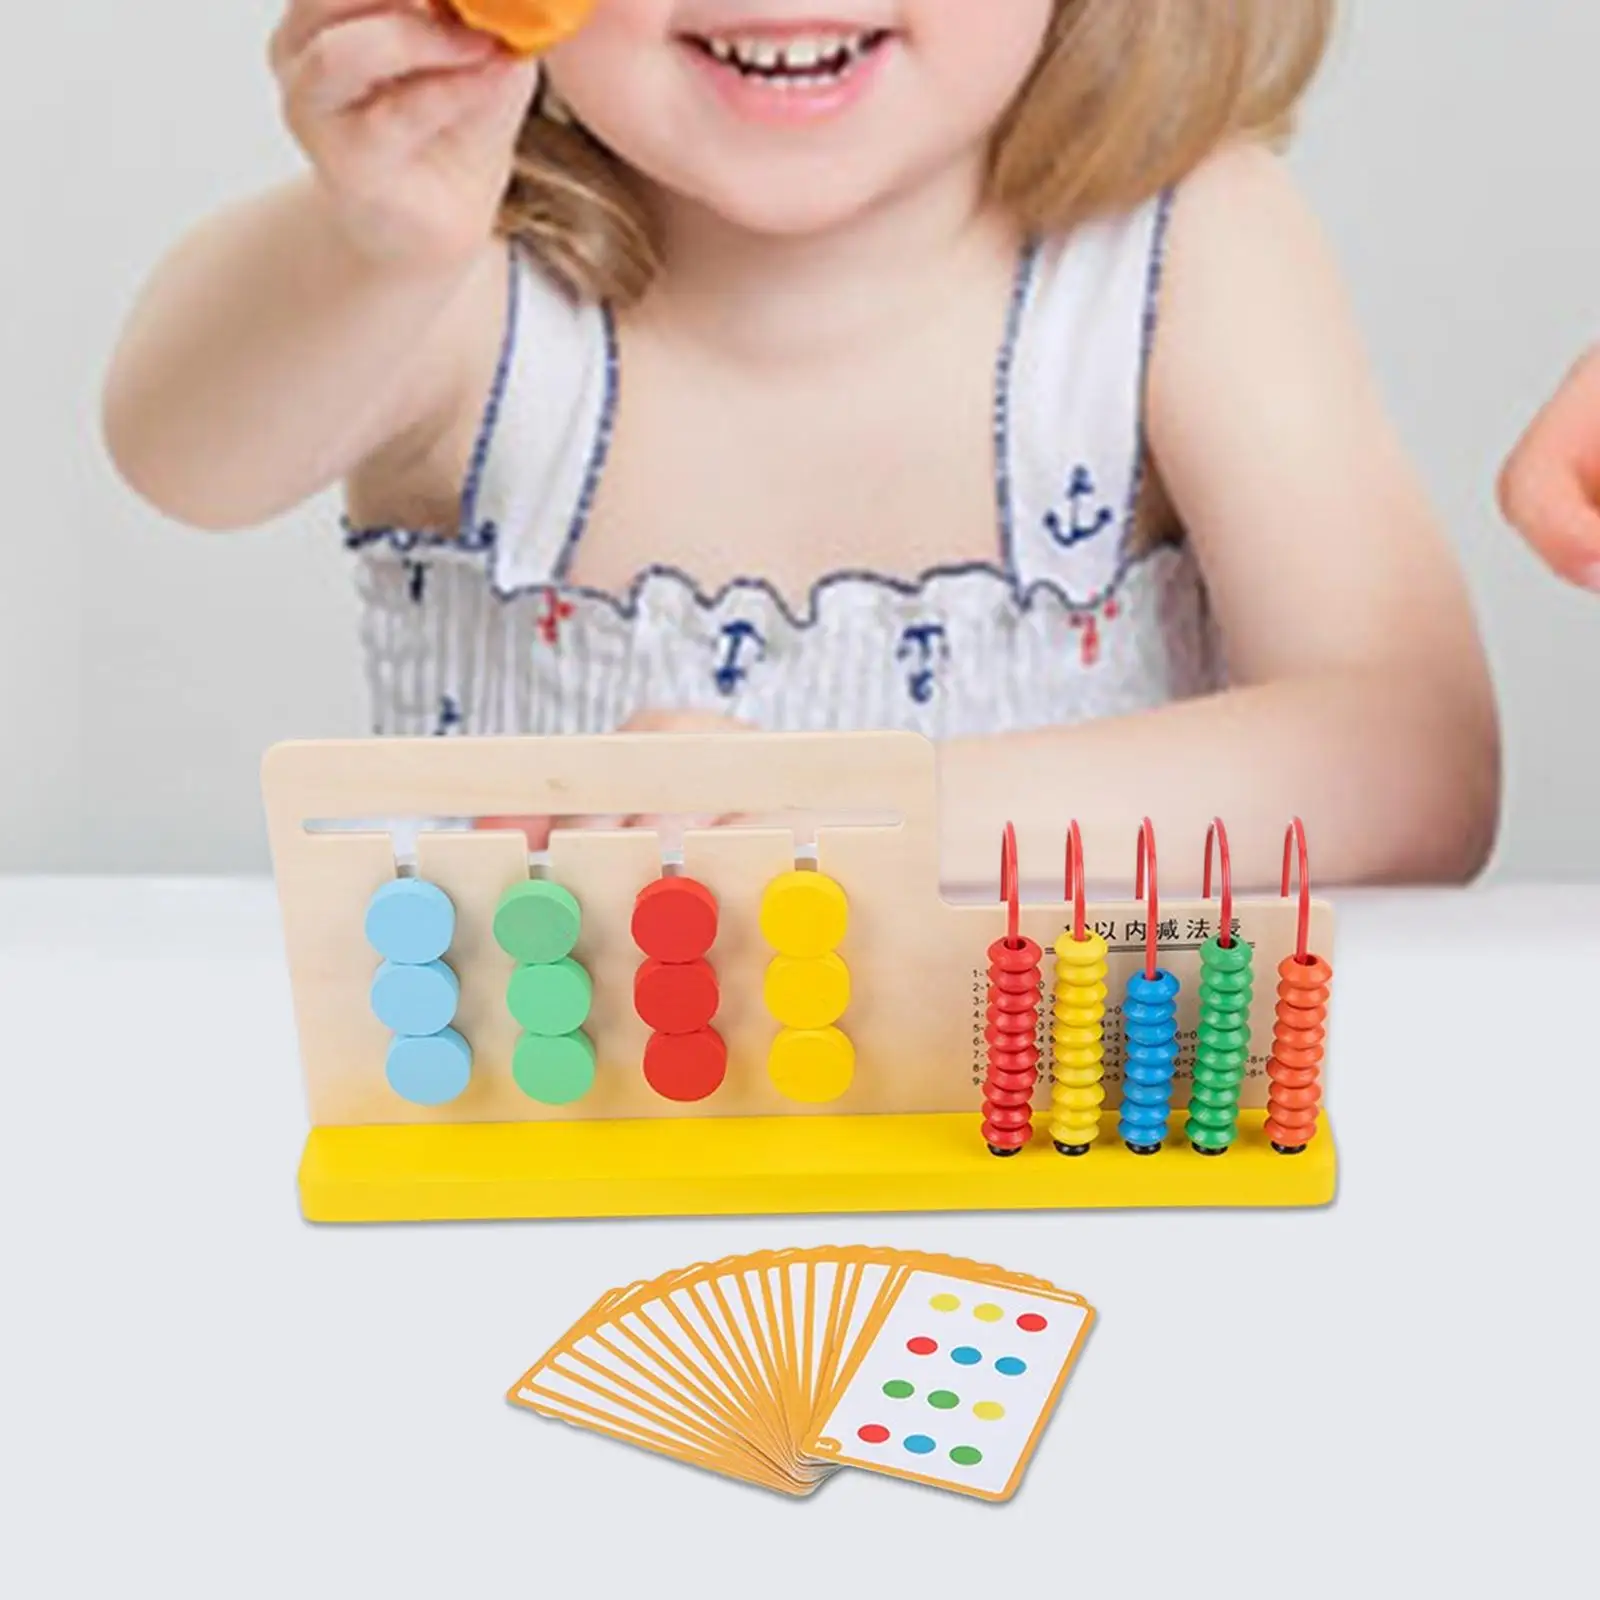 Slide Puzzle Colorful Bead Frame Abacus Brain Teasers Early Educational Abacus Counting Beads Birthday Gift Ages 3 4 Years Old